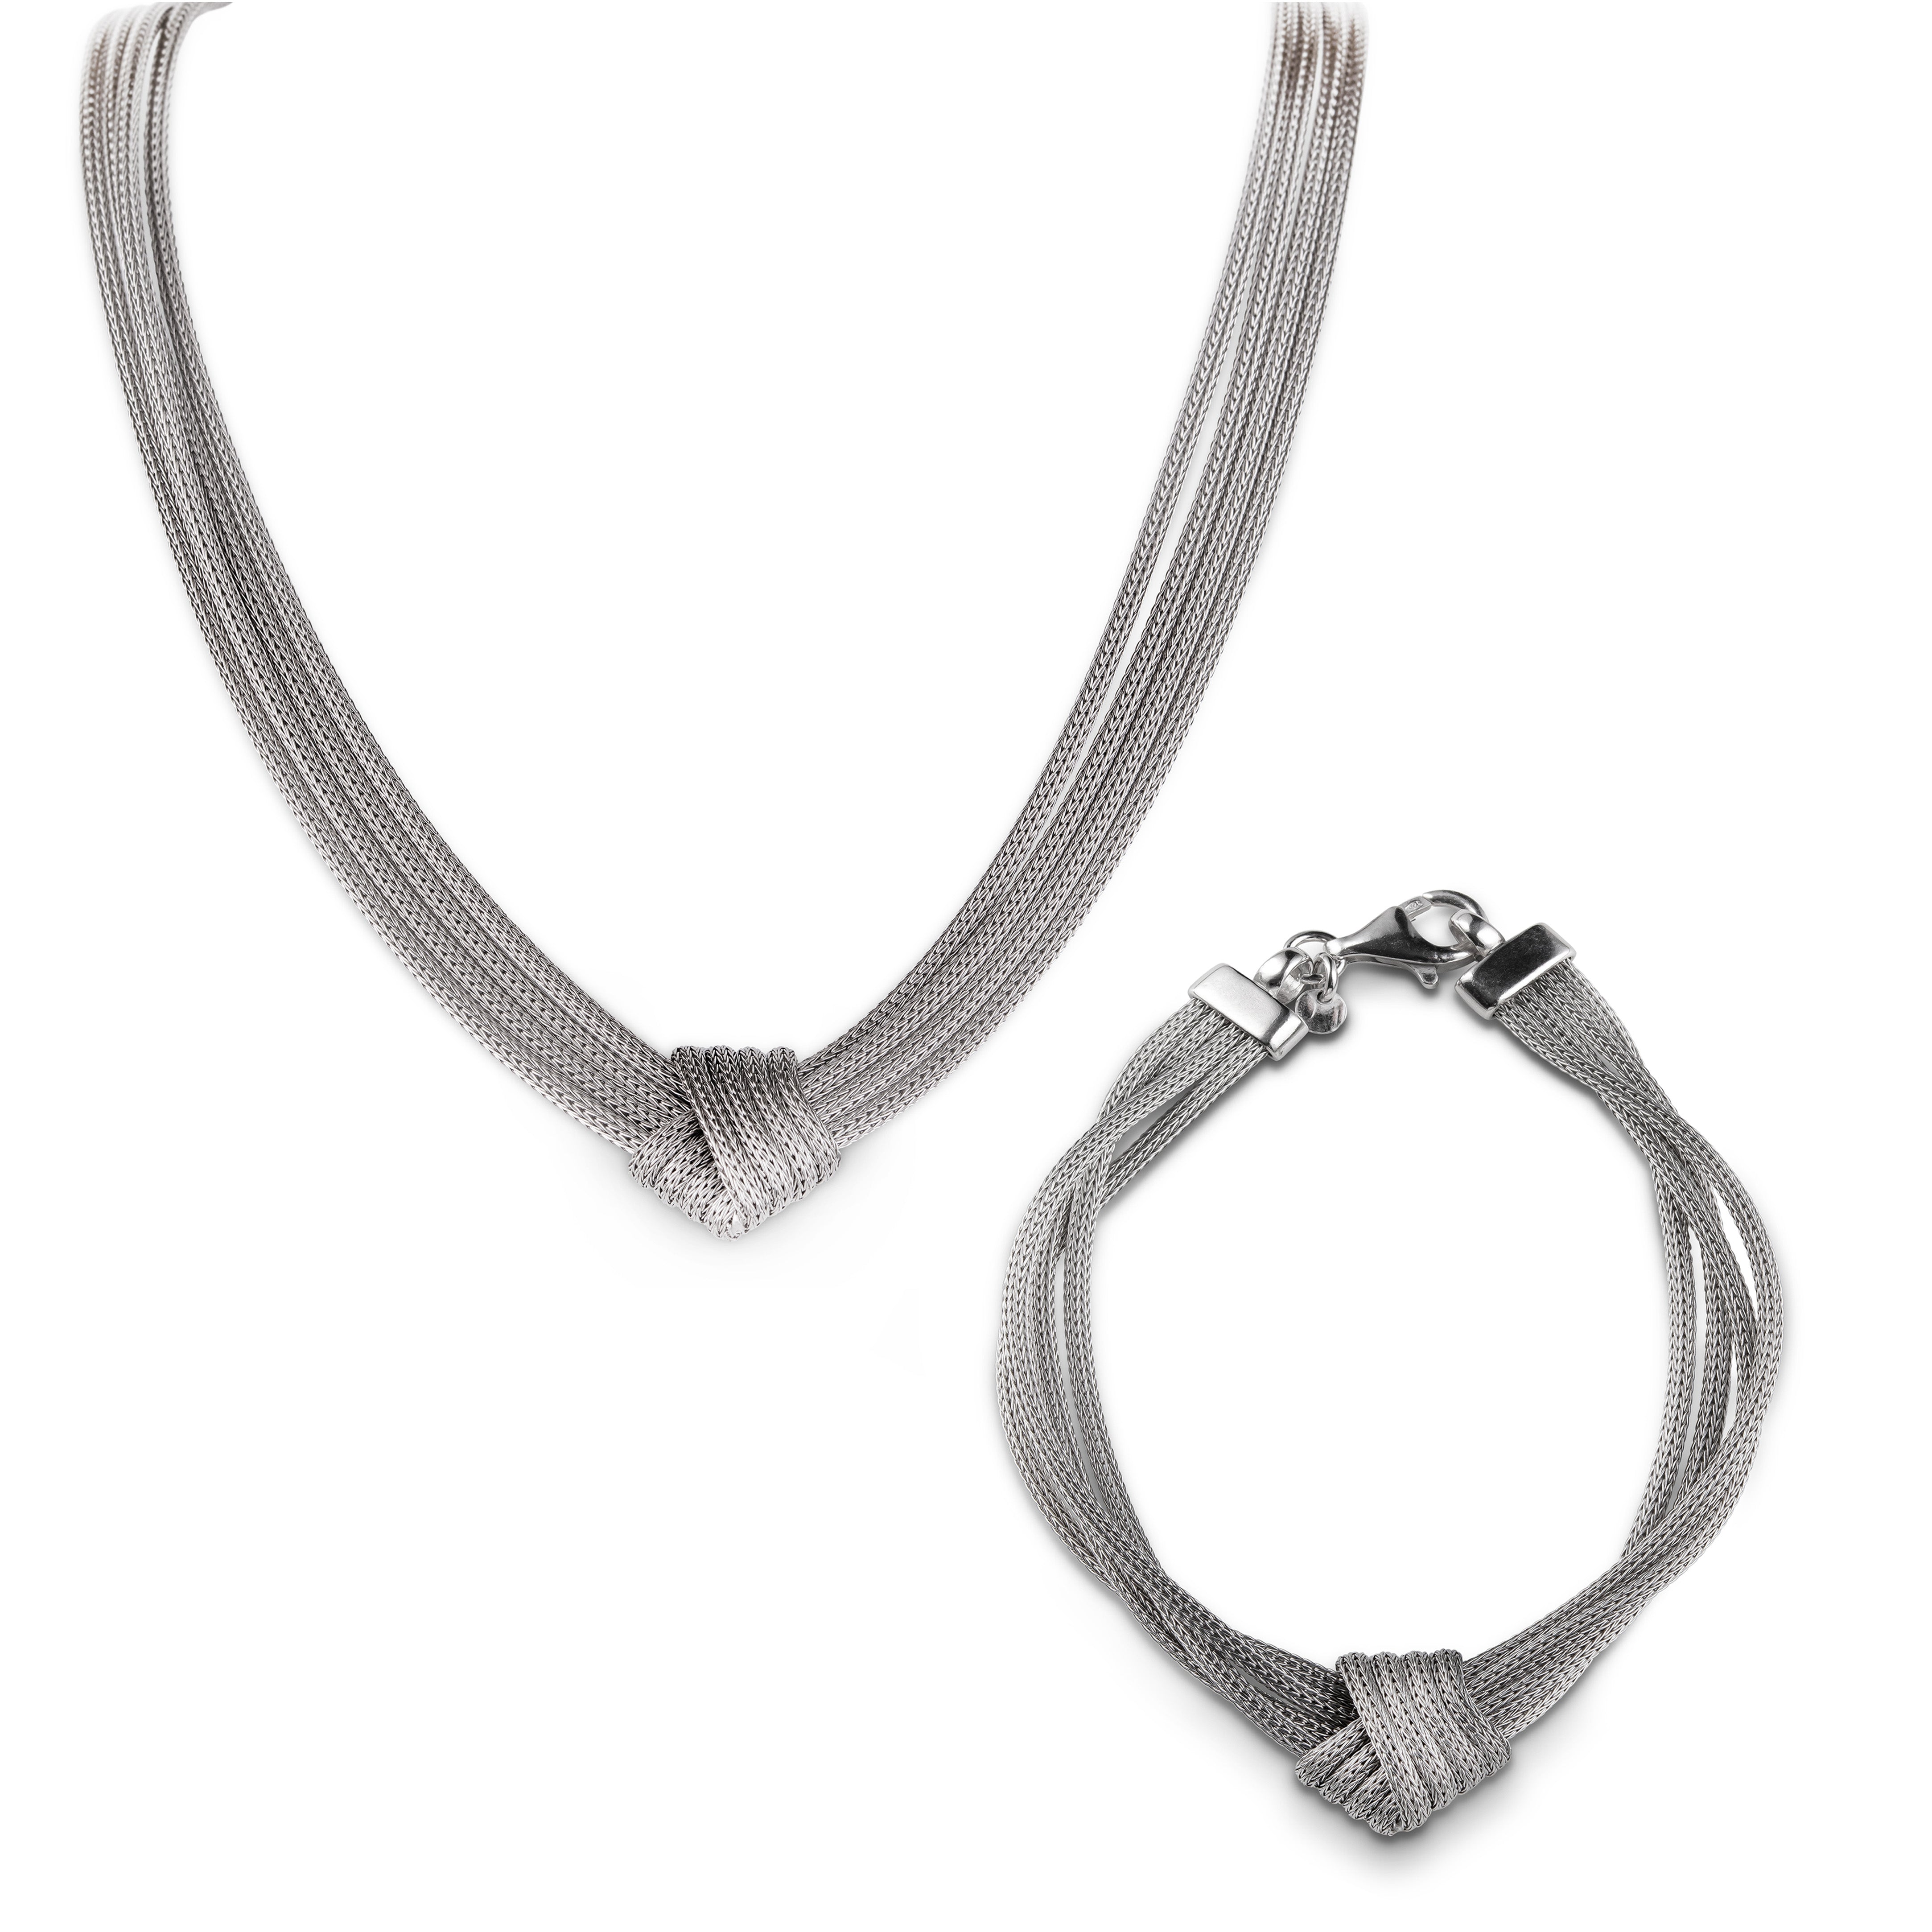 MESH Silver Knot Gift Set